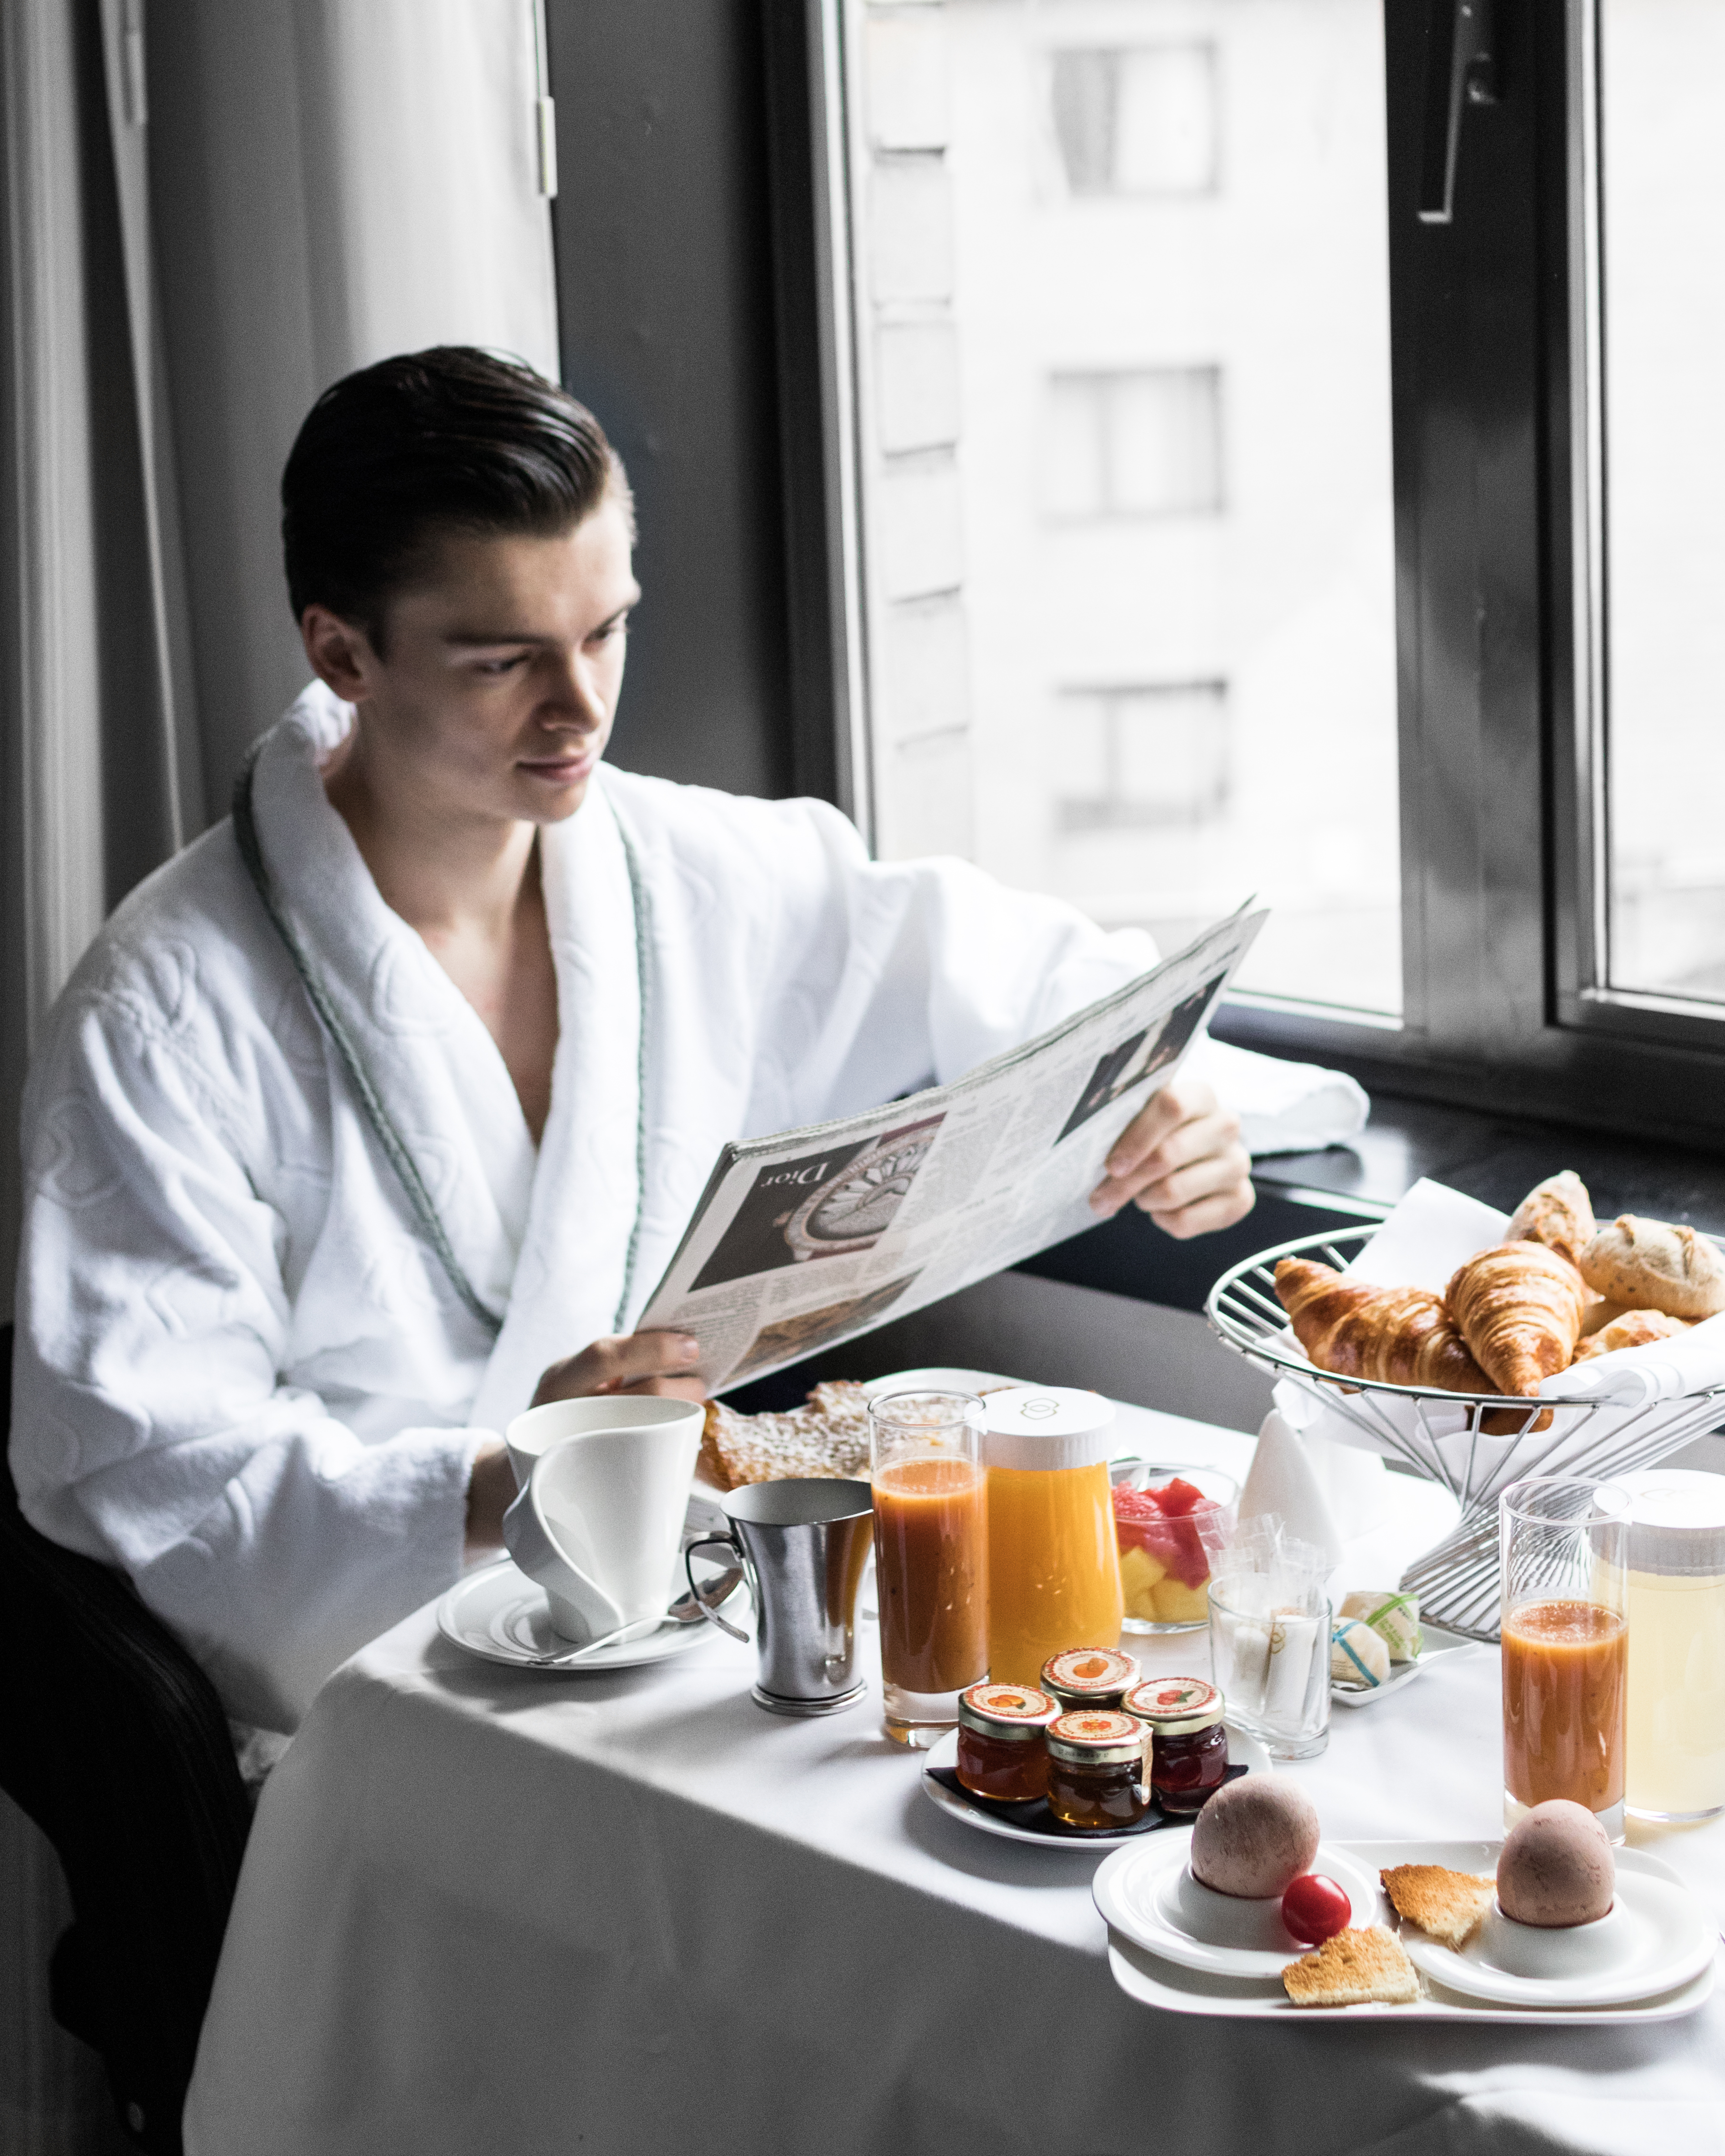 Stay in Brussels at the Sofitel Le Louise